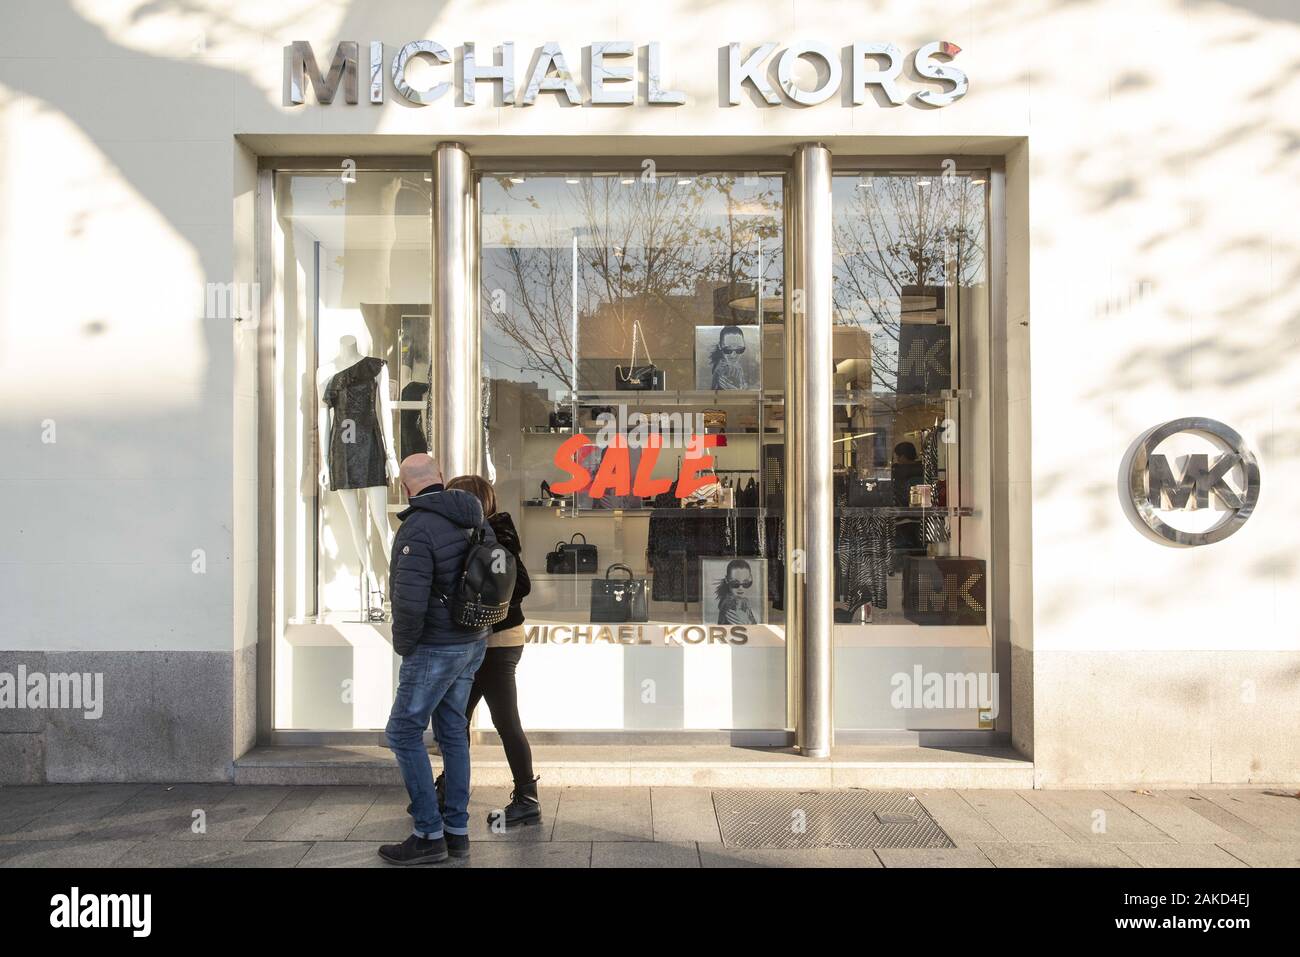 Michael kors logo hi-res stock photography and images - Alamy